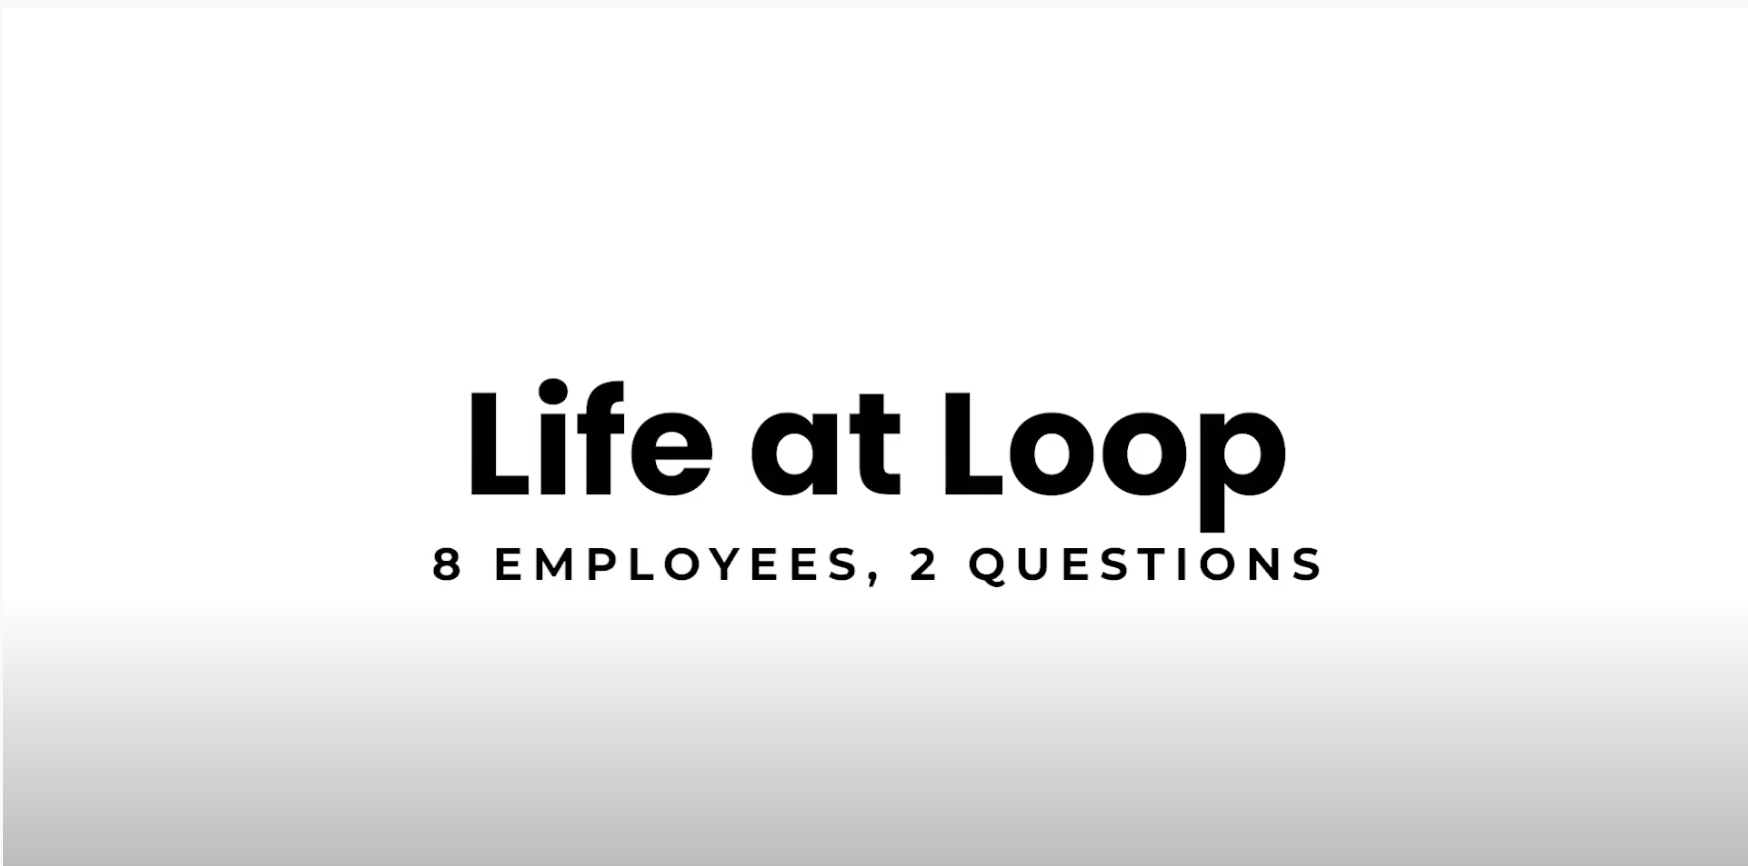 8 employees, 2 questions - part two